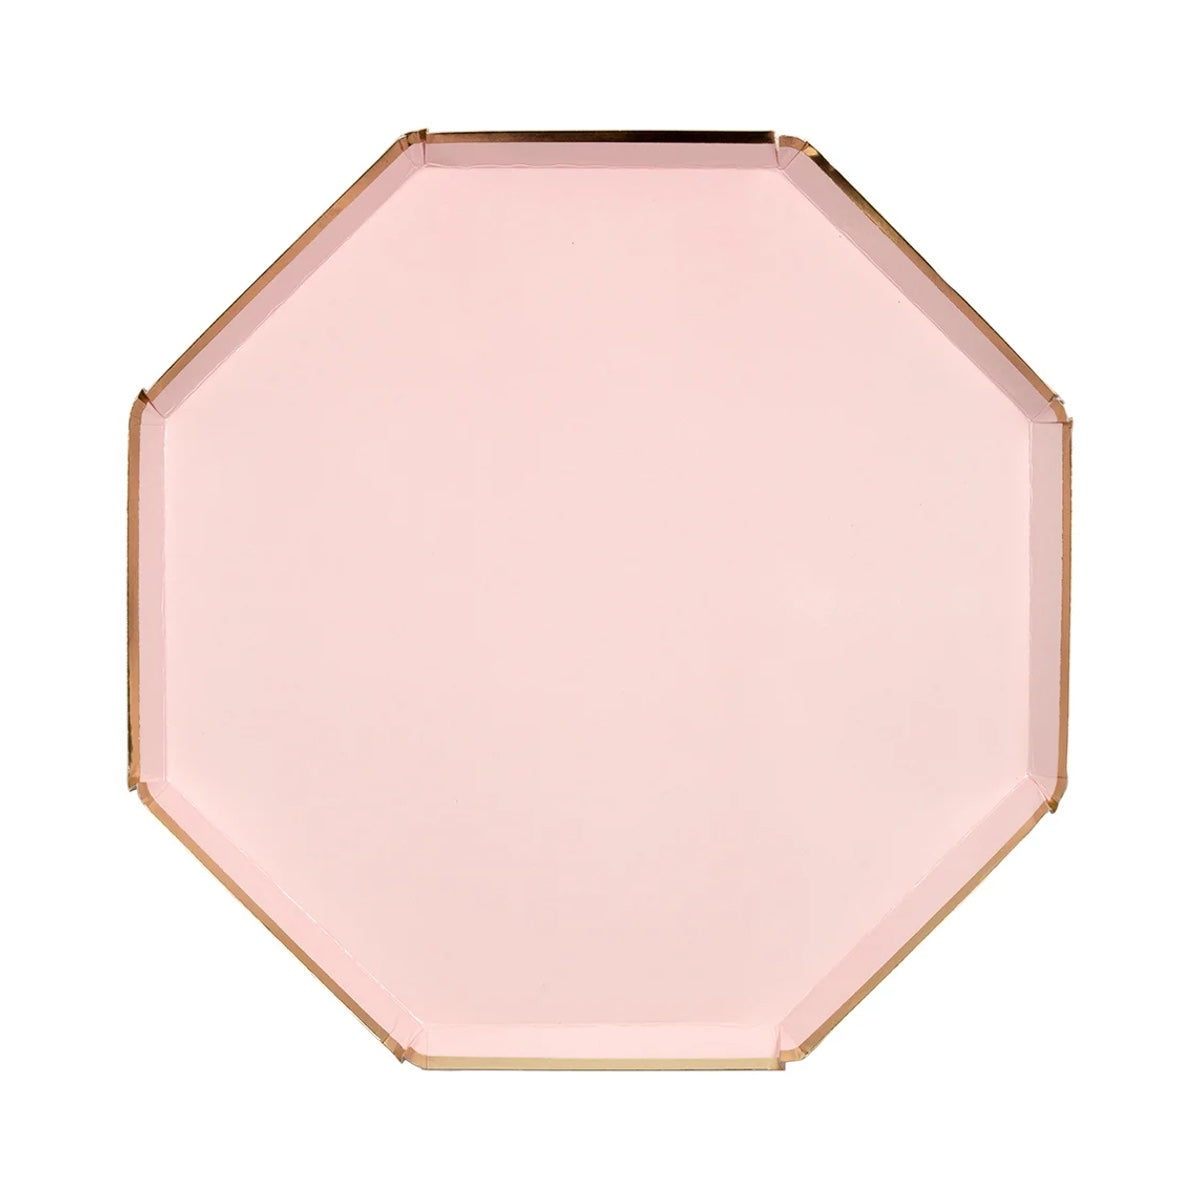 Dusty Pink Octagonal Paper Plate